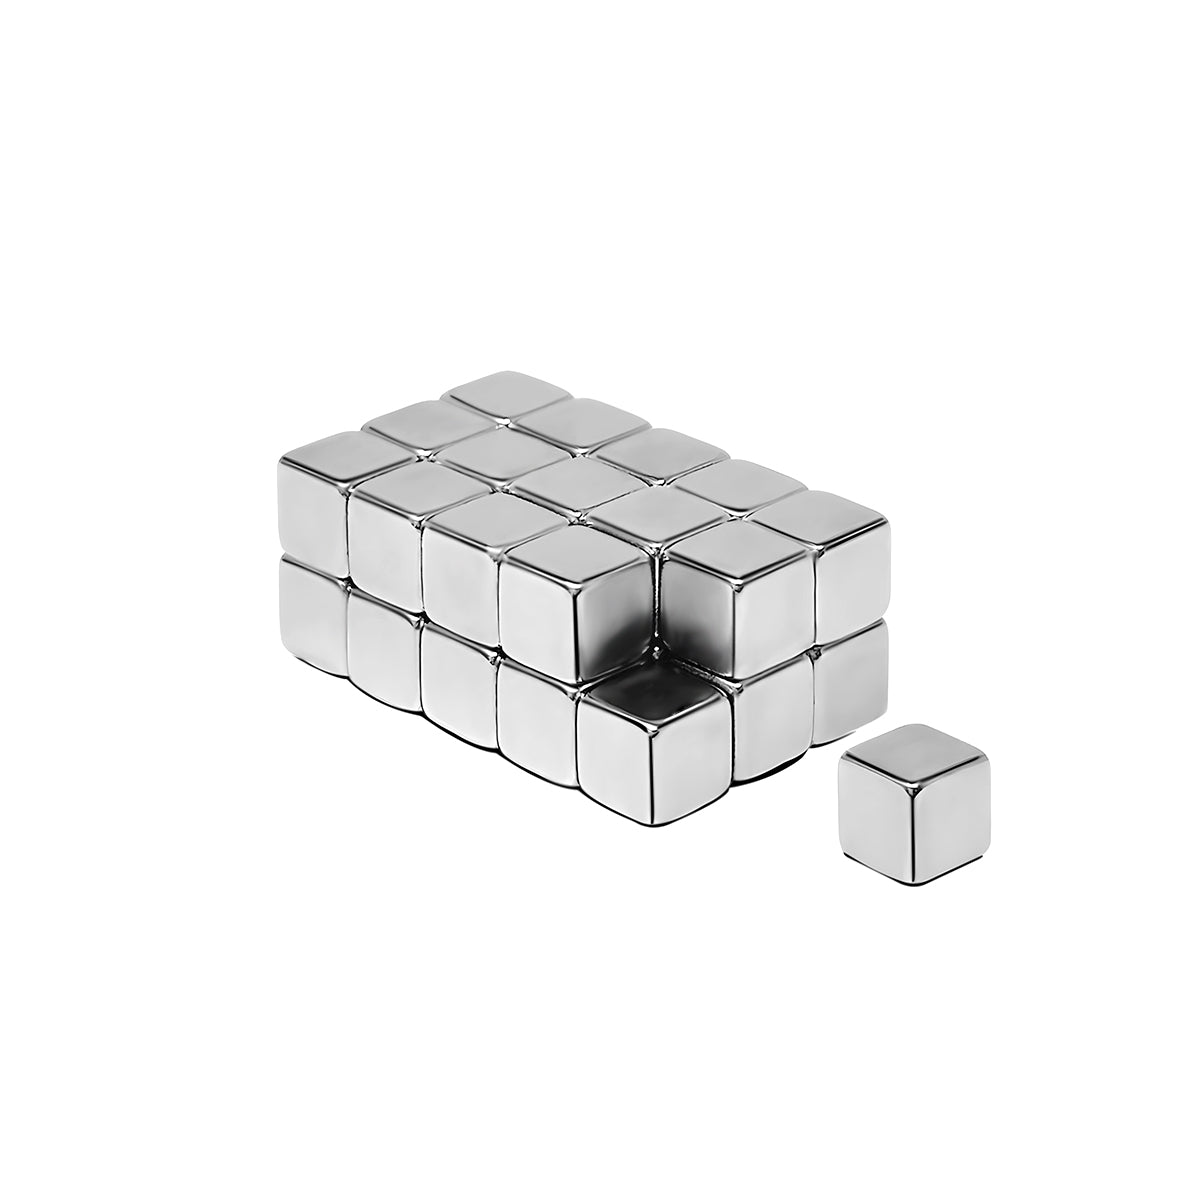 Wrapables Cube Neodymium Magnets, Strong Magnets for Refrigerator